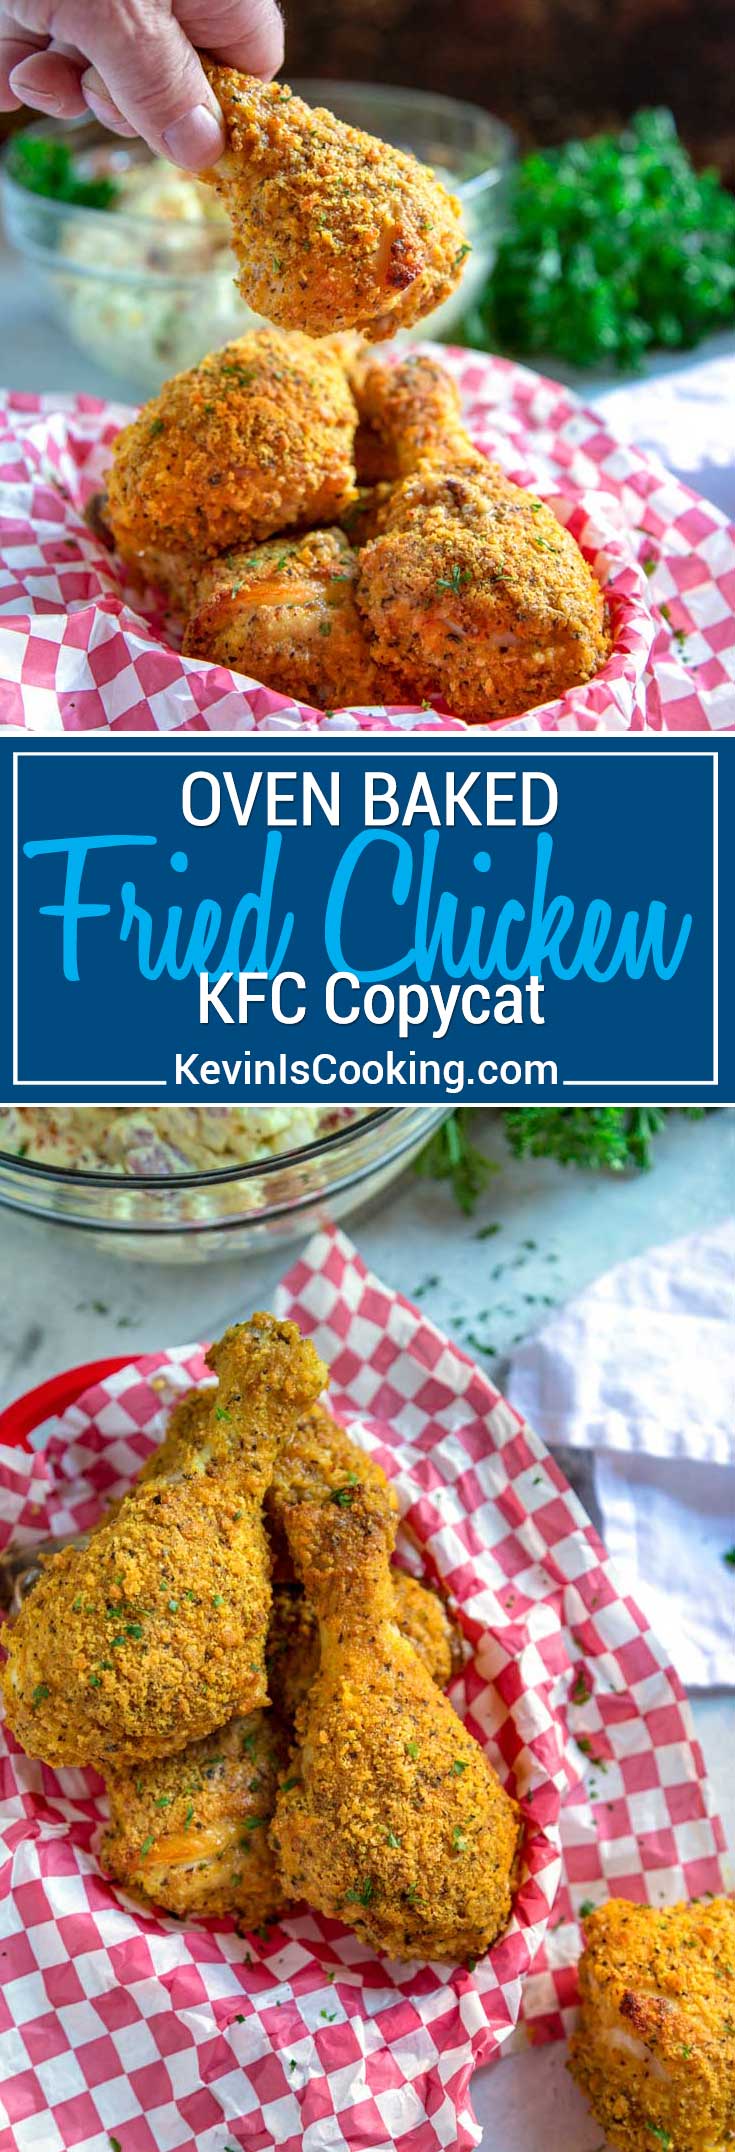 My Oven Fried Chicken is a KFC Copycat, is BAKED not fried, and has a fantastic flavor and crunch. What more could you ask for in “fried chicken” without all the grease!